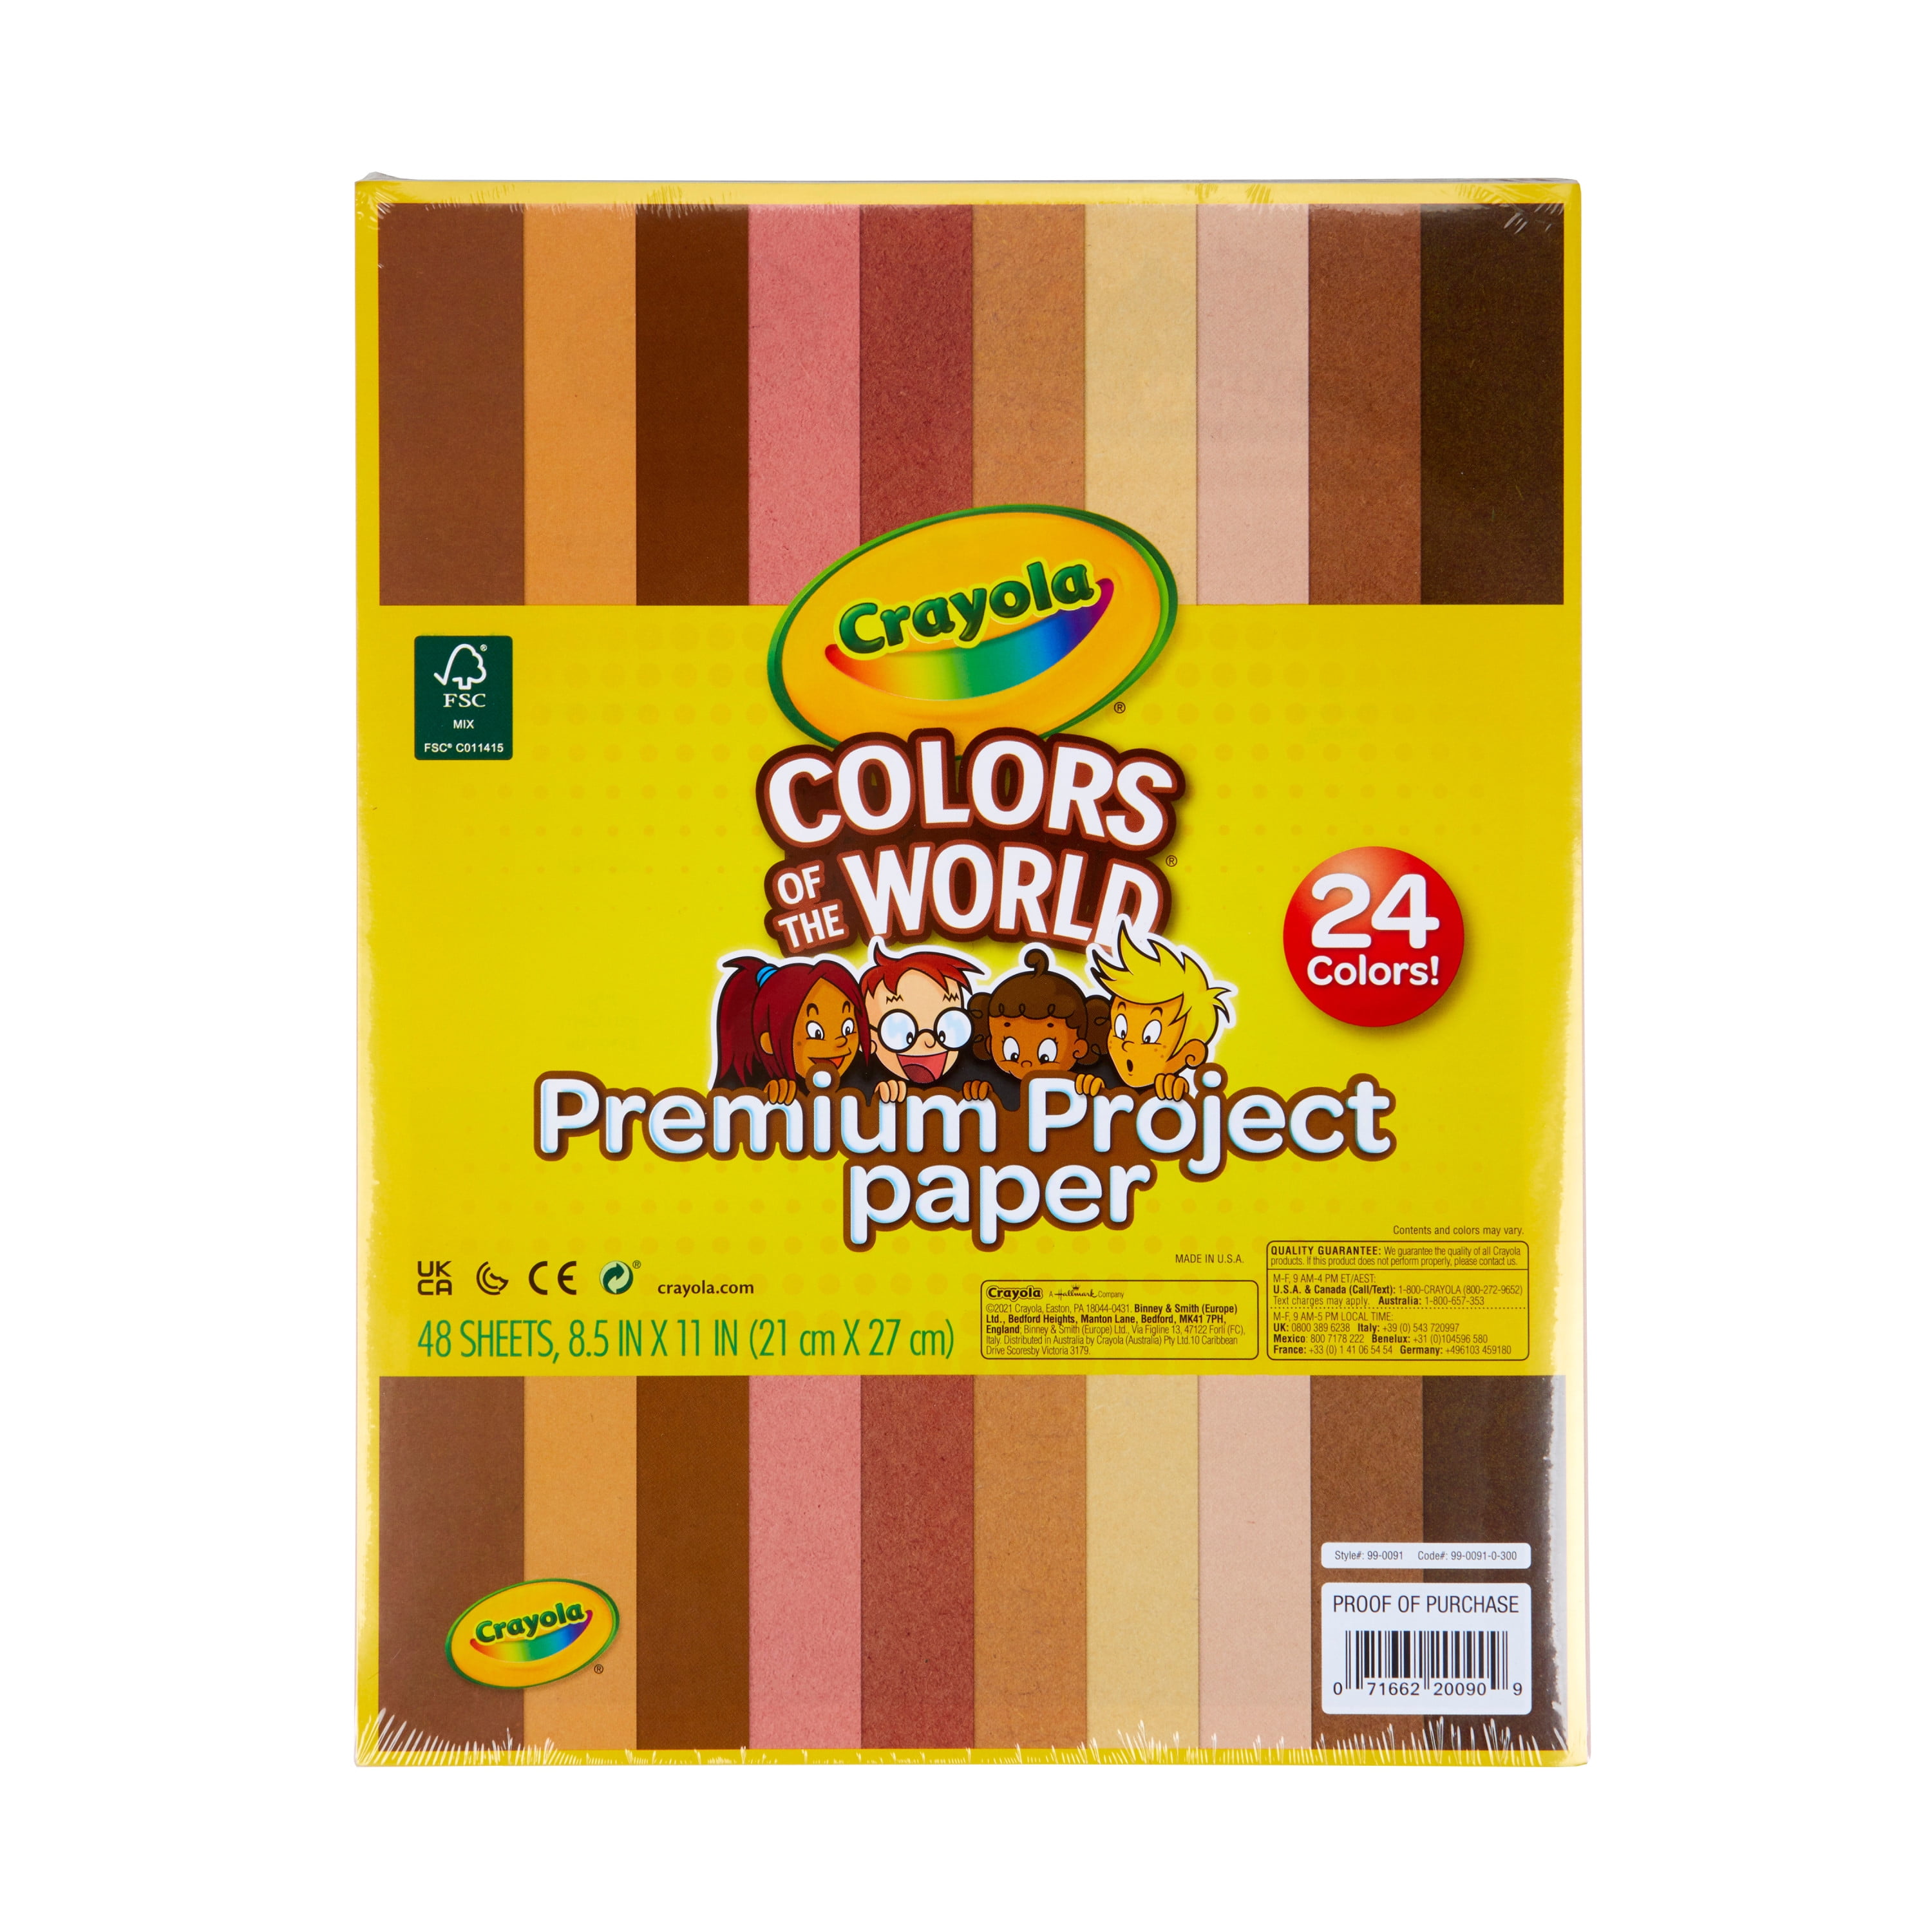 Crayola Construction Paper in Colors of the World, 8.5” x 11”, 24 Colors,  Craft Supplies, 48 Pages